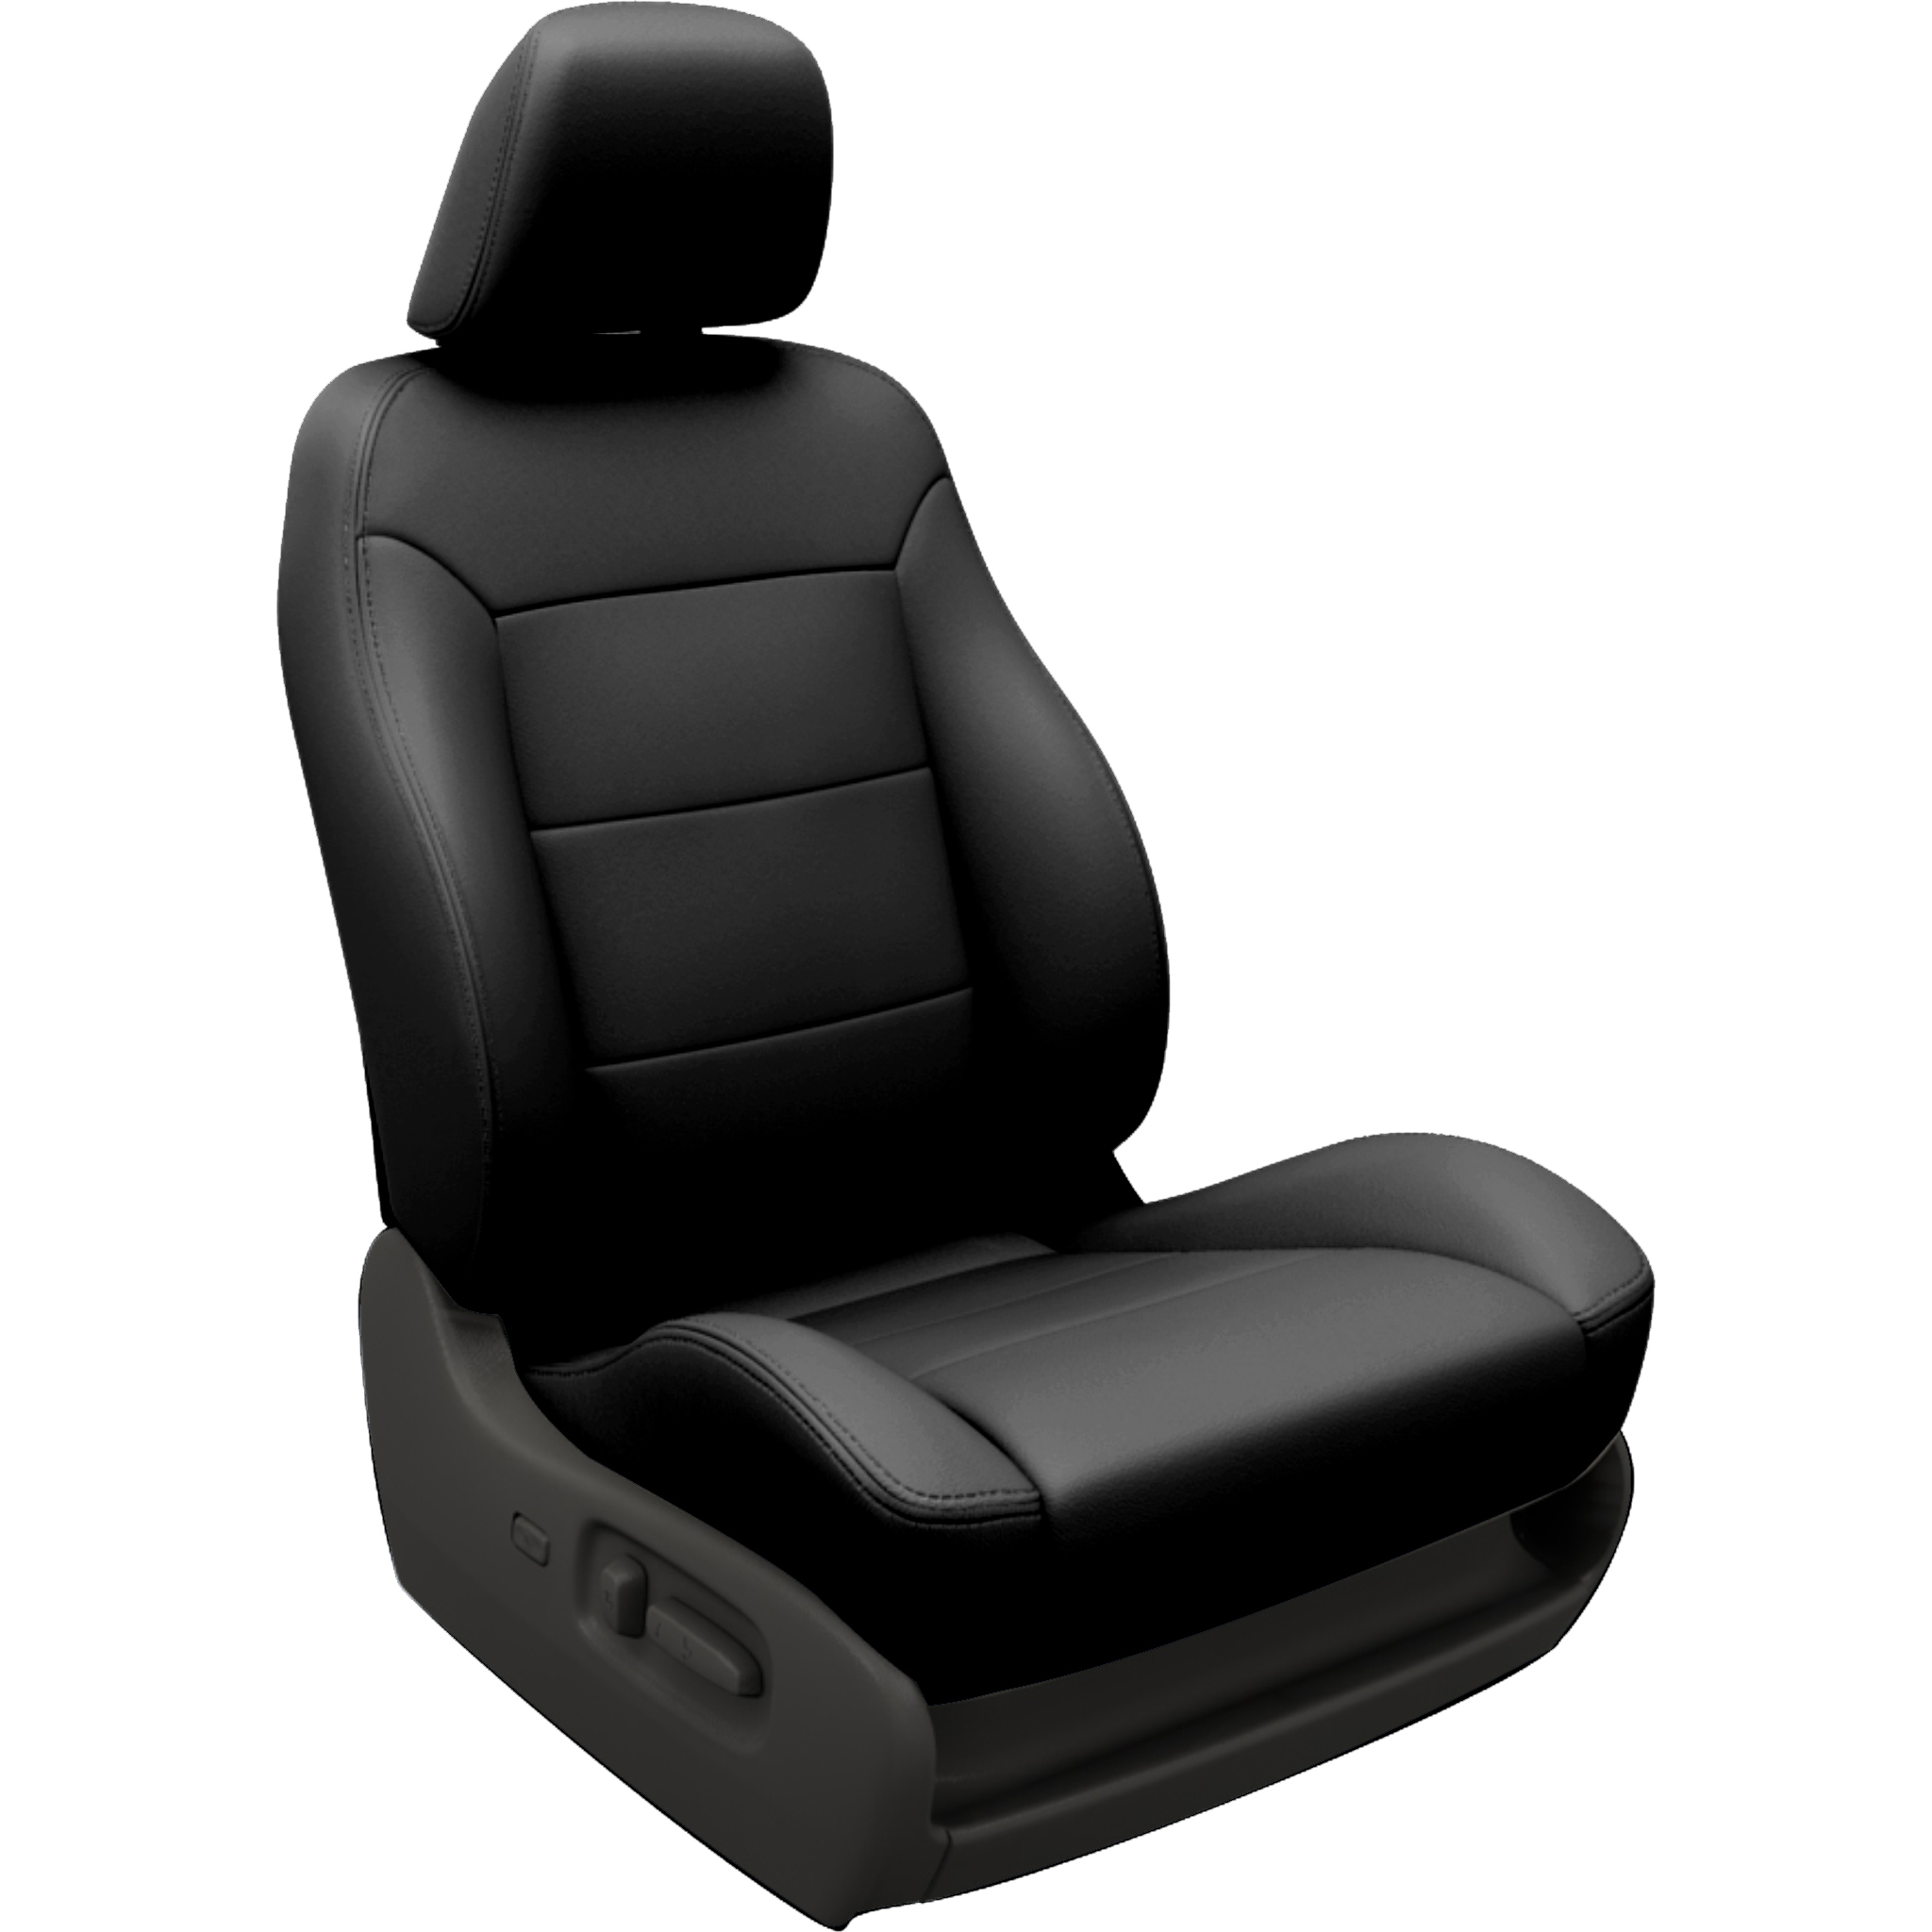 CHRYSLER 300 2005-2010 IGGEE S.LEATHER CUSTOM SEAT COVER 13COLORS AVAILABLE 